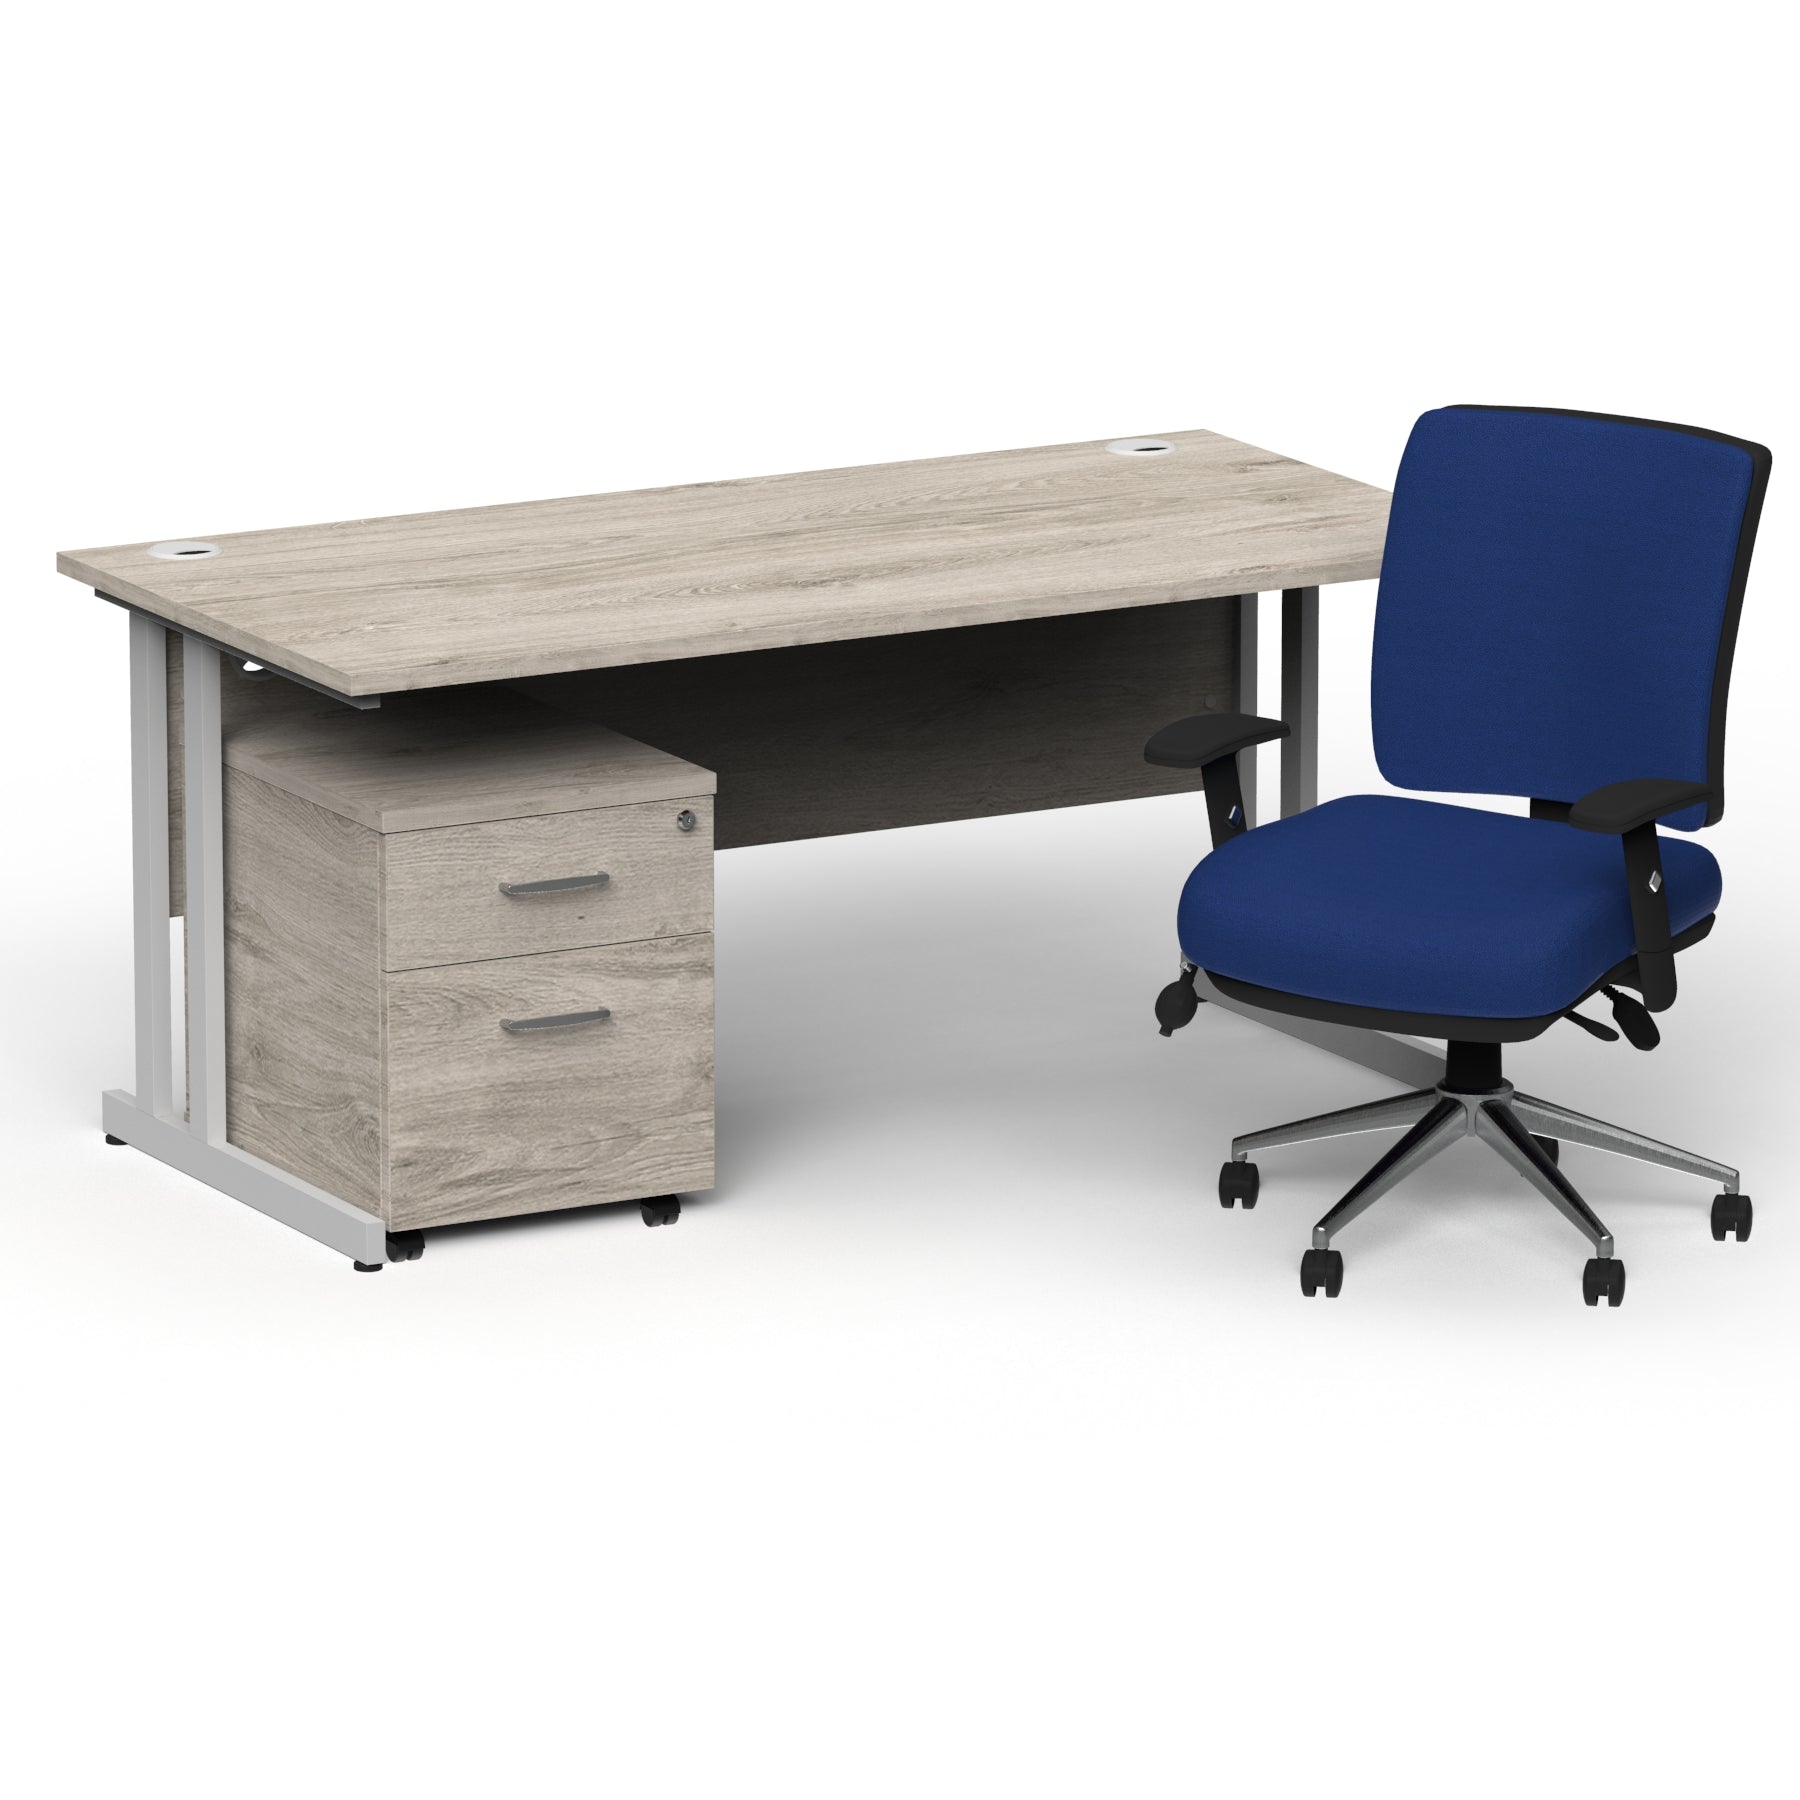 Impulse 1600mm Cantilever Desk & Mobile Pedestal with Chiro Medium Back Blue Chair - 5-Year Furniture Guarantee, 2-Year Seating Guarantee